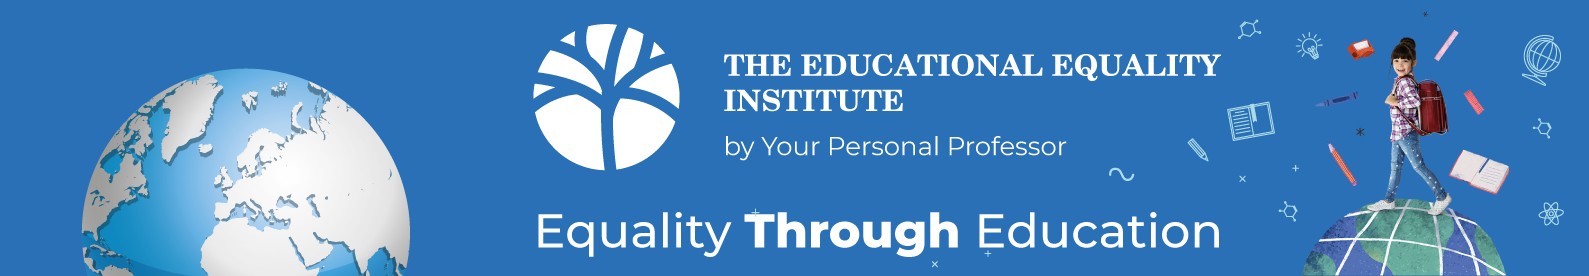 the educational equality institute